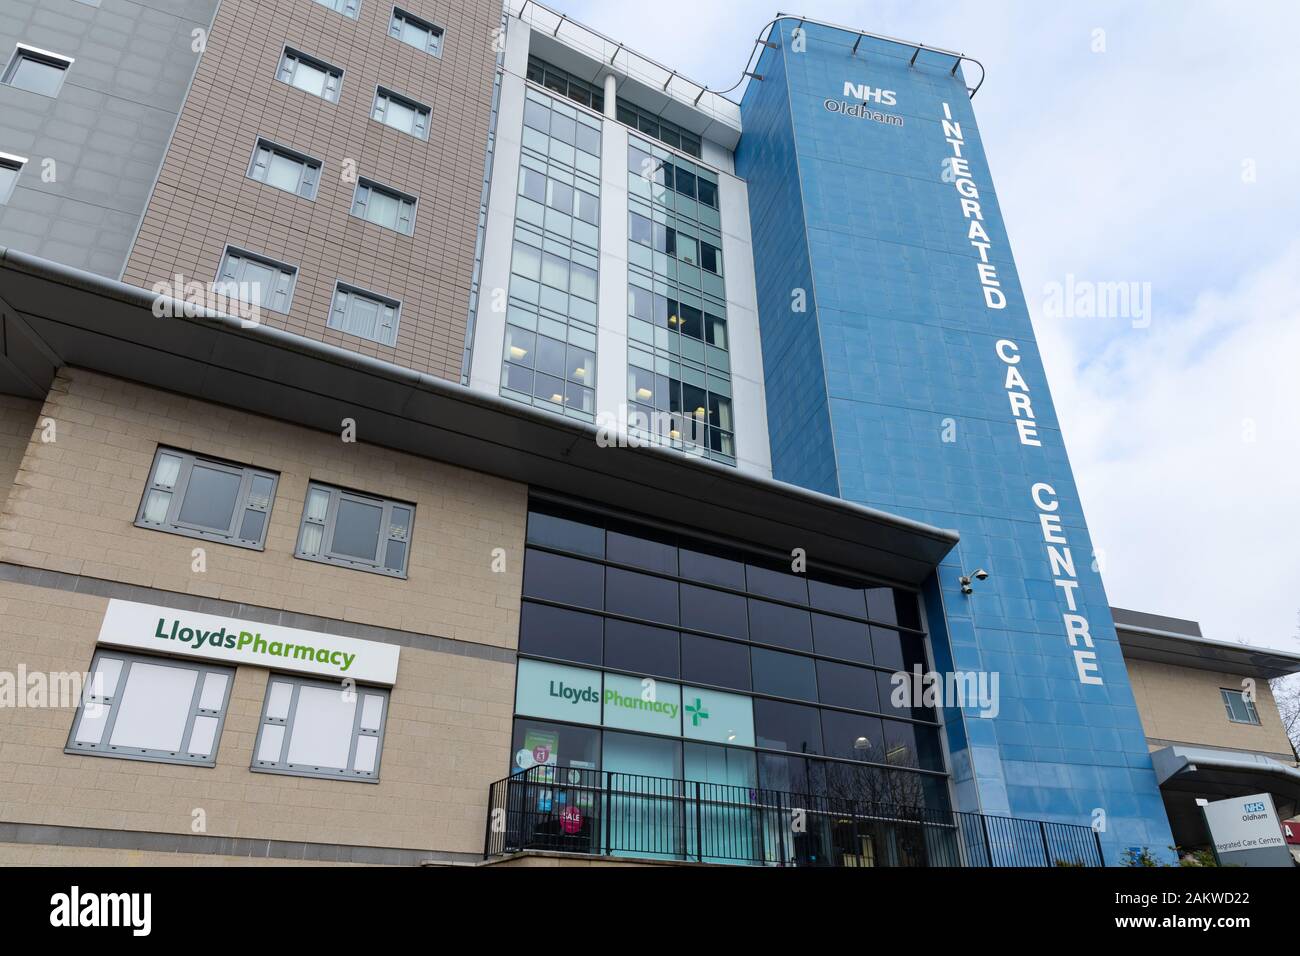 A view of Oldham's Inergrated Care Centre, Oldham,UK Stock Photo